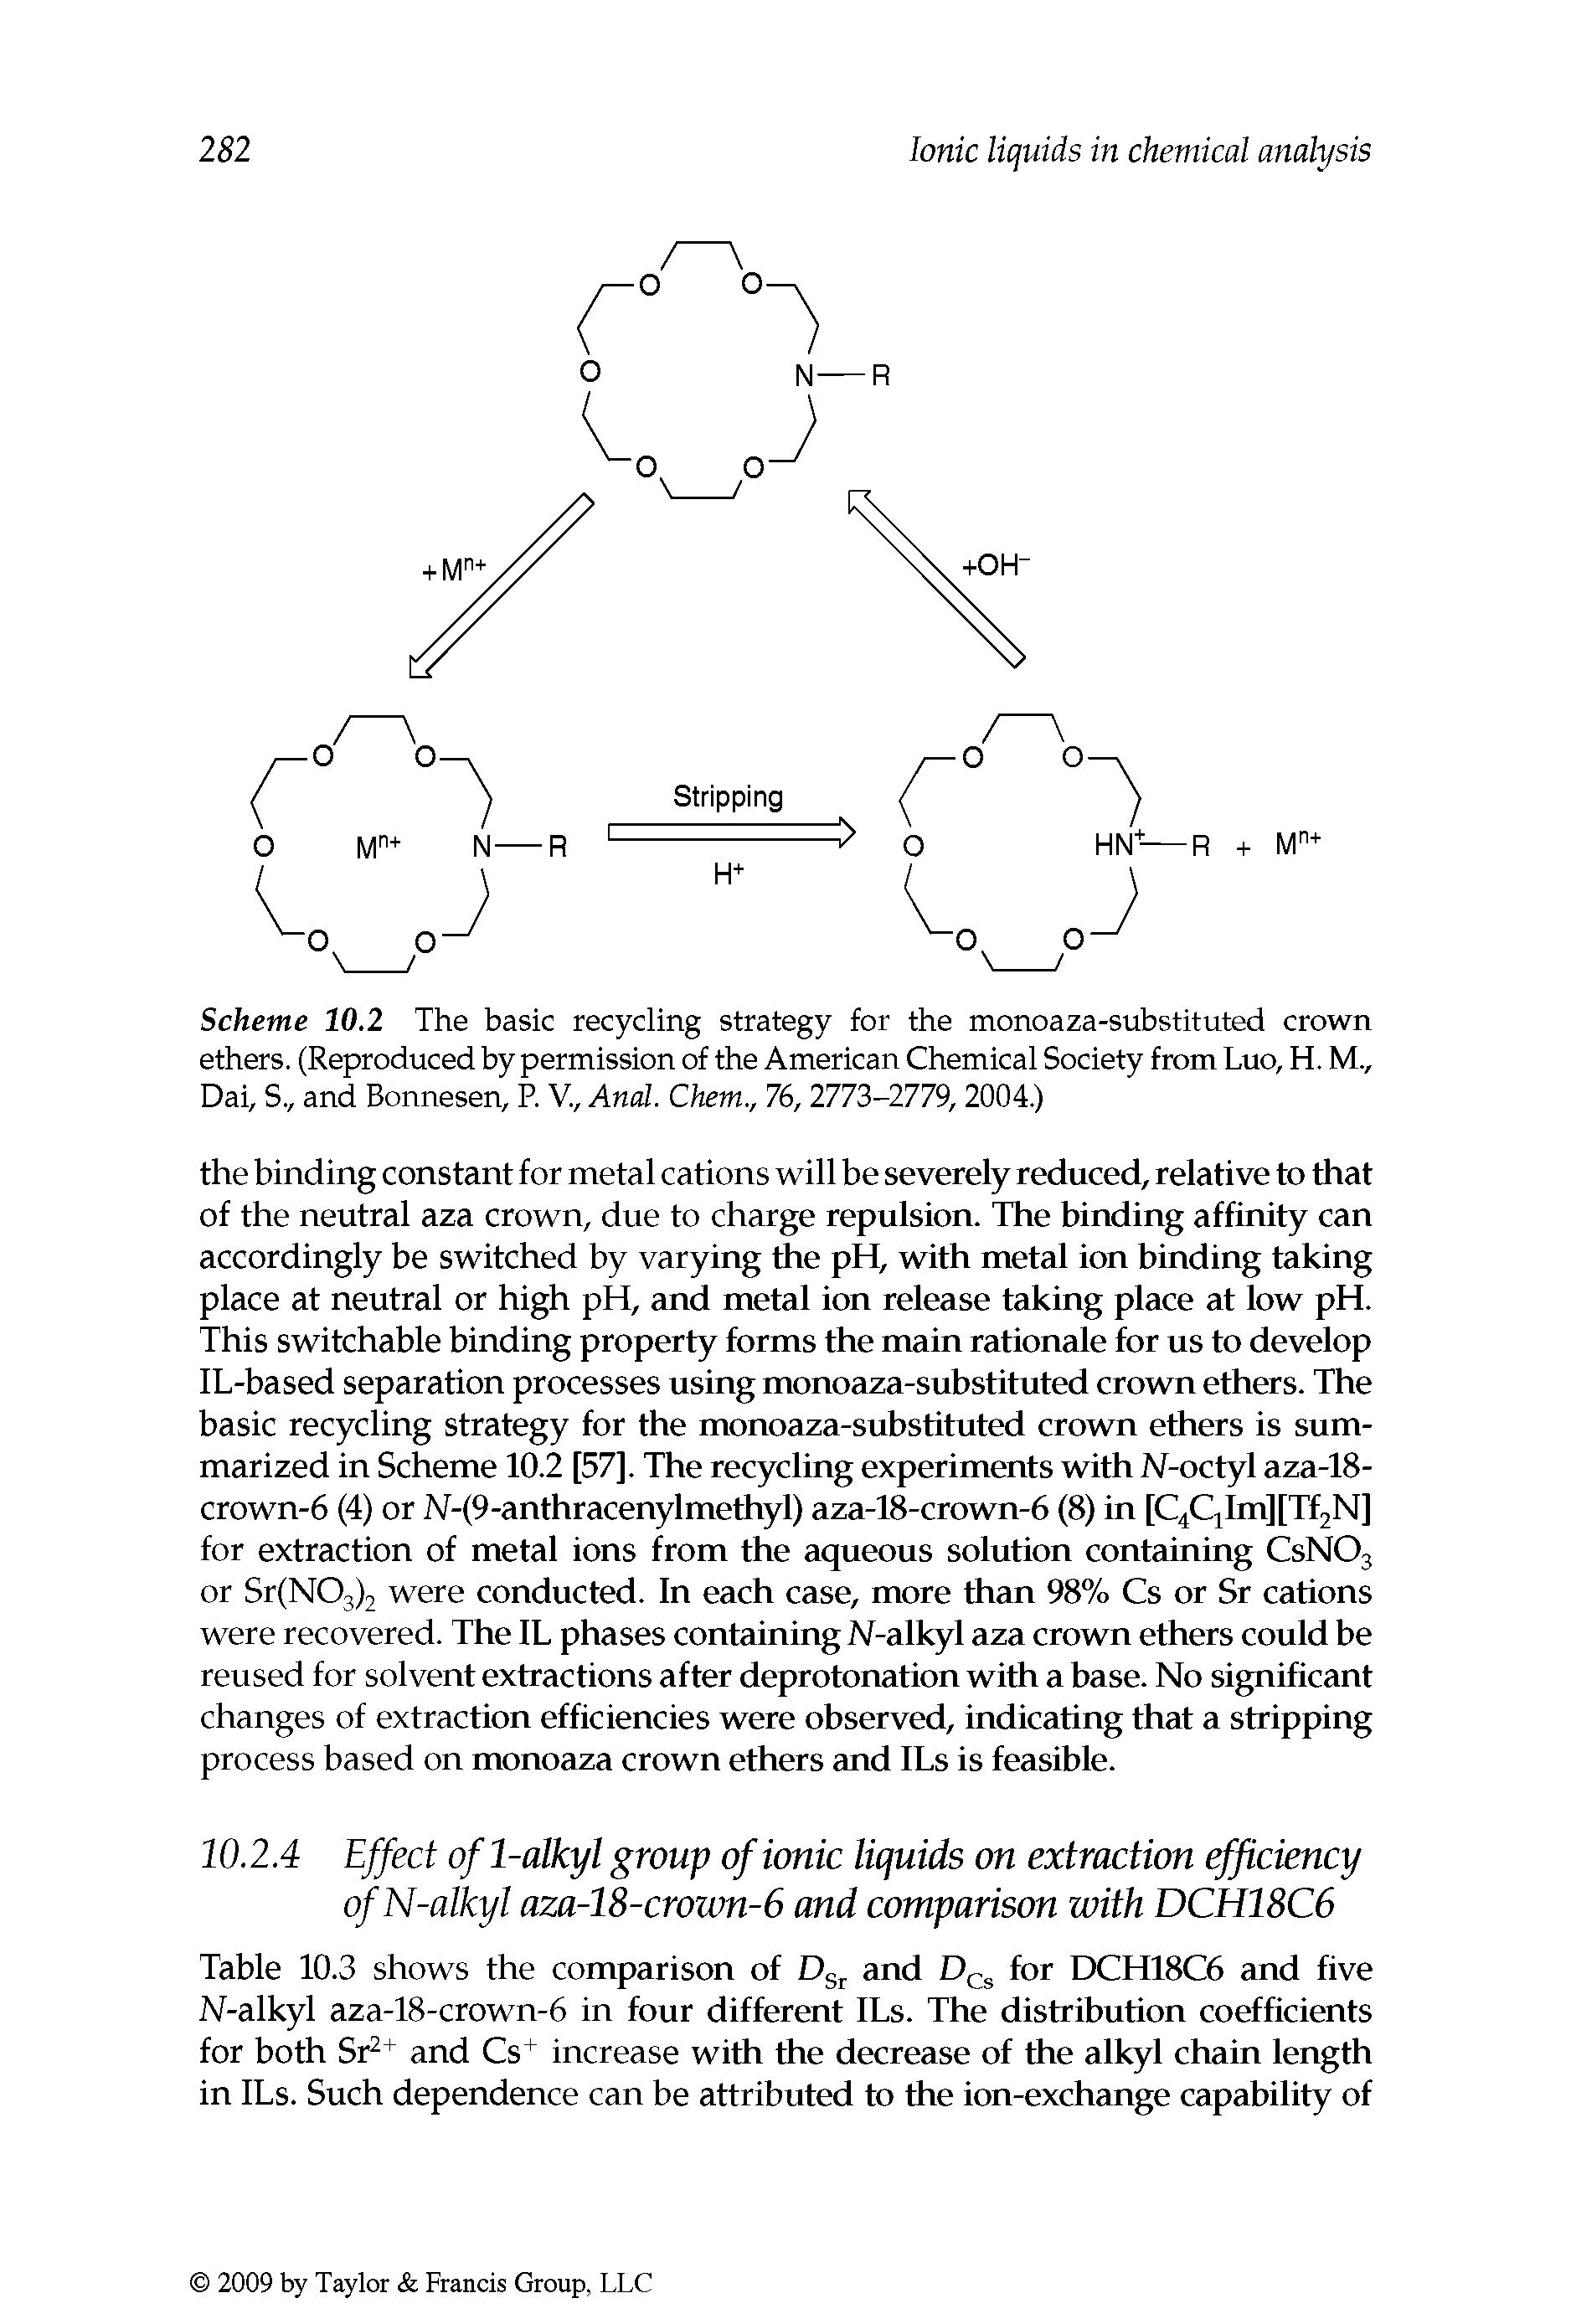 Scheme 10.2 The basic recycling strategy for the monoaza-substituted crown ethers. (Reproduced by permission of the American Chemical Society from Luo, H. M., Dai, S., and Bonnesen, R V., Anal. Chem., 76, 2773-2779, 2004.)...